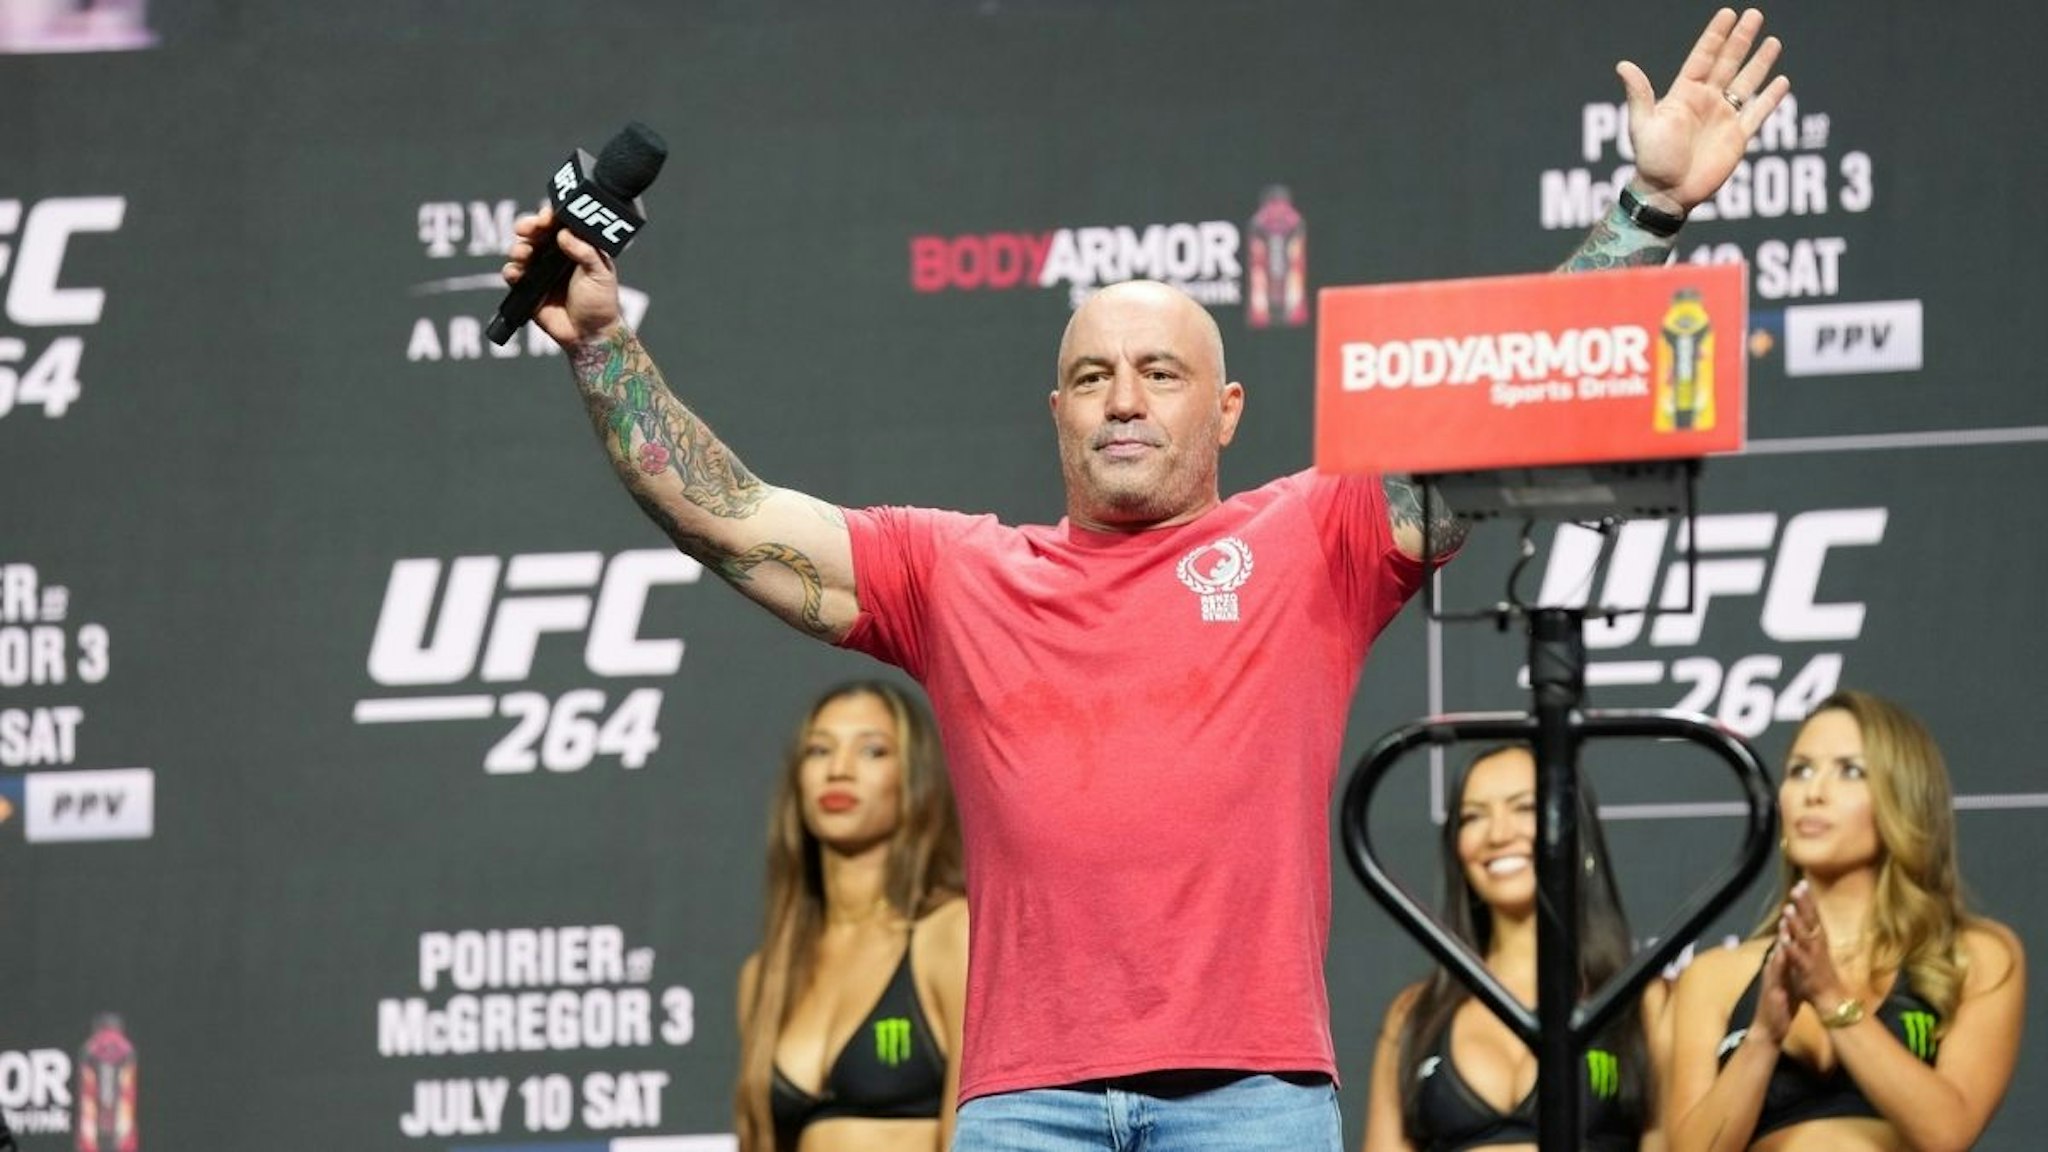 Joe Rogan waves to a packed house at the UFC 264 ceremonial weigh-in at T-Mobile Arena on July 9, 2021 in Las Vegas, NV, United States.